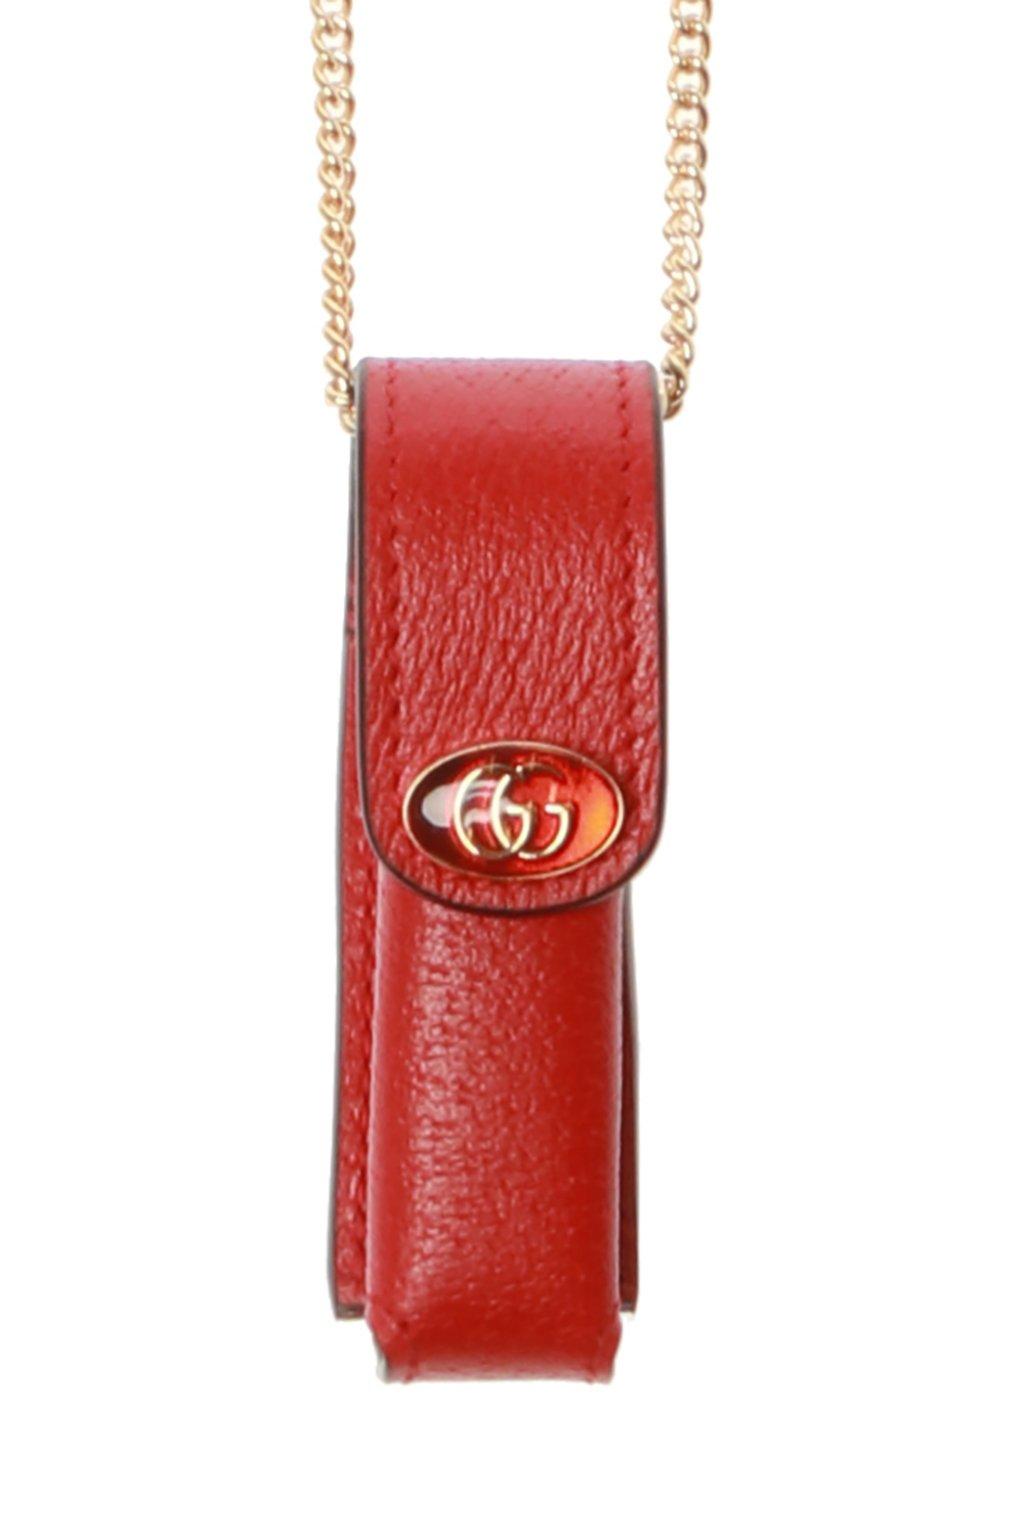 Gucci Porte Rouges Leather Lipstick Case Key Chain In Lobster Red